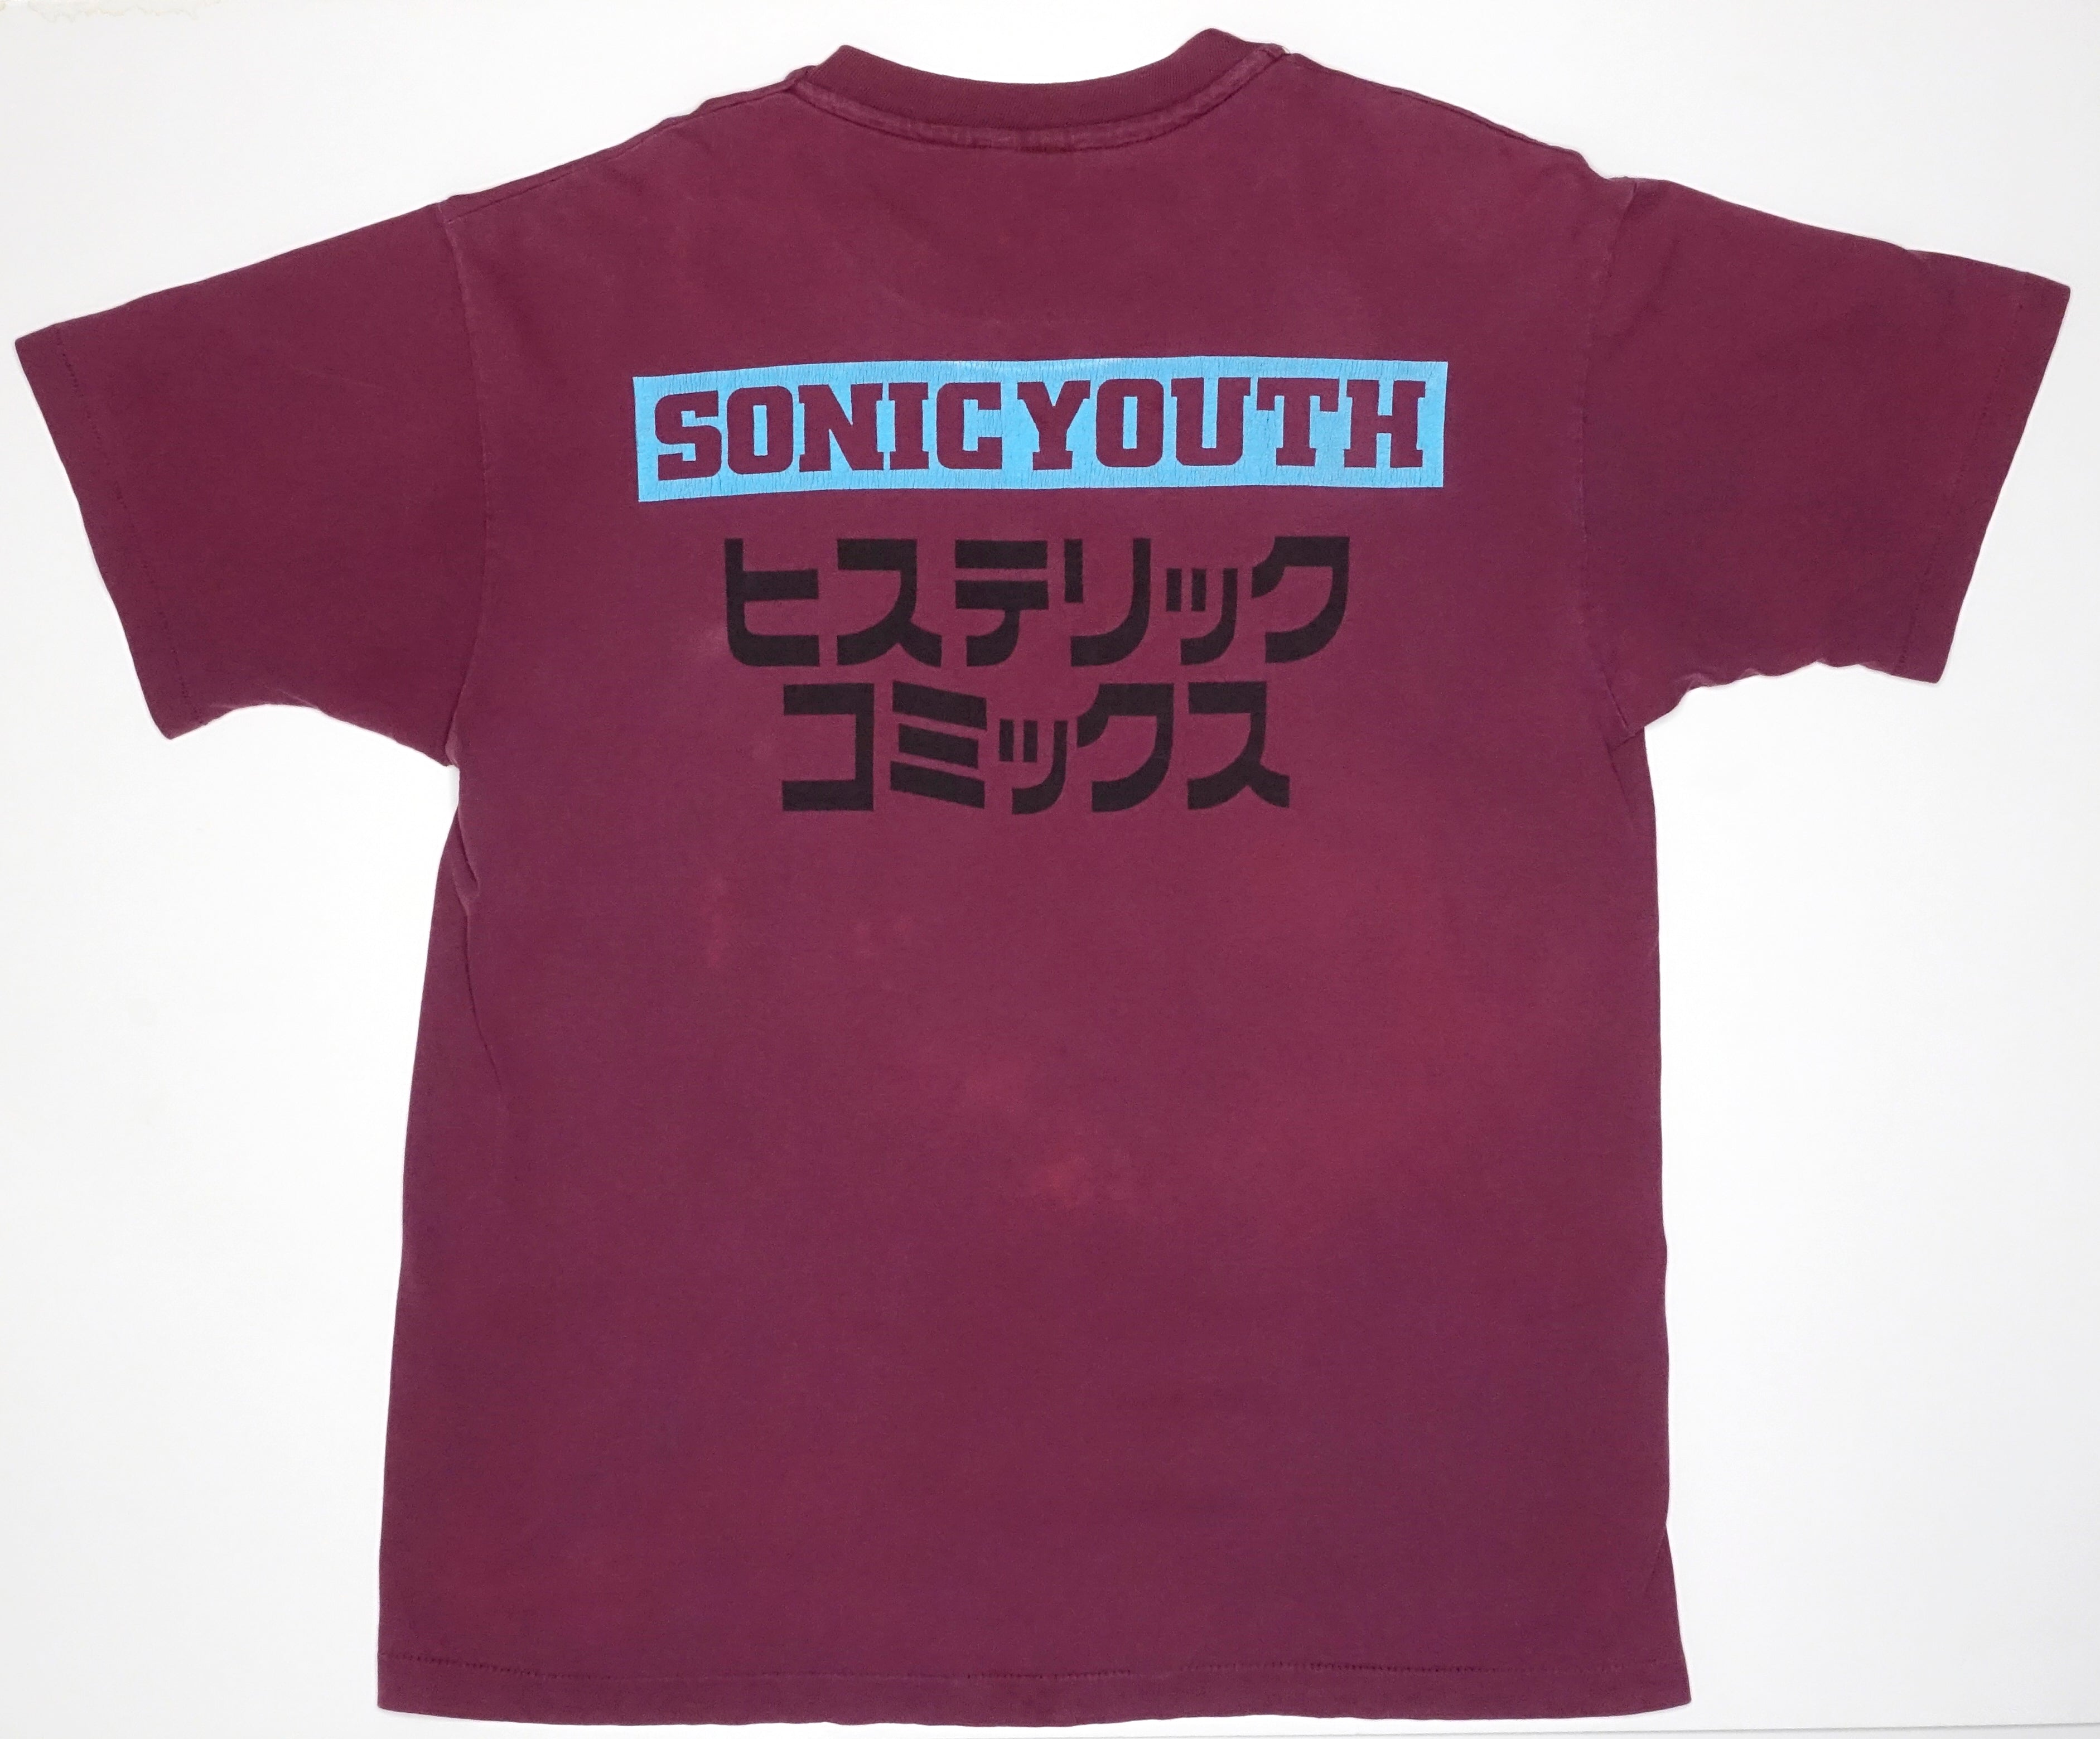 Sonic Youth - Invincible Squadron / Hysteric Comics Tour Shirt Size XL